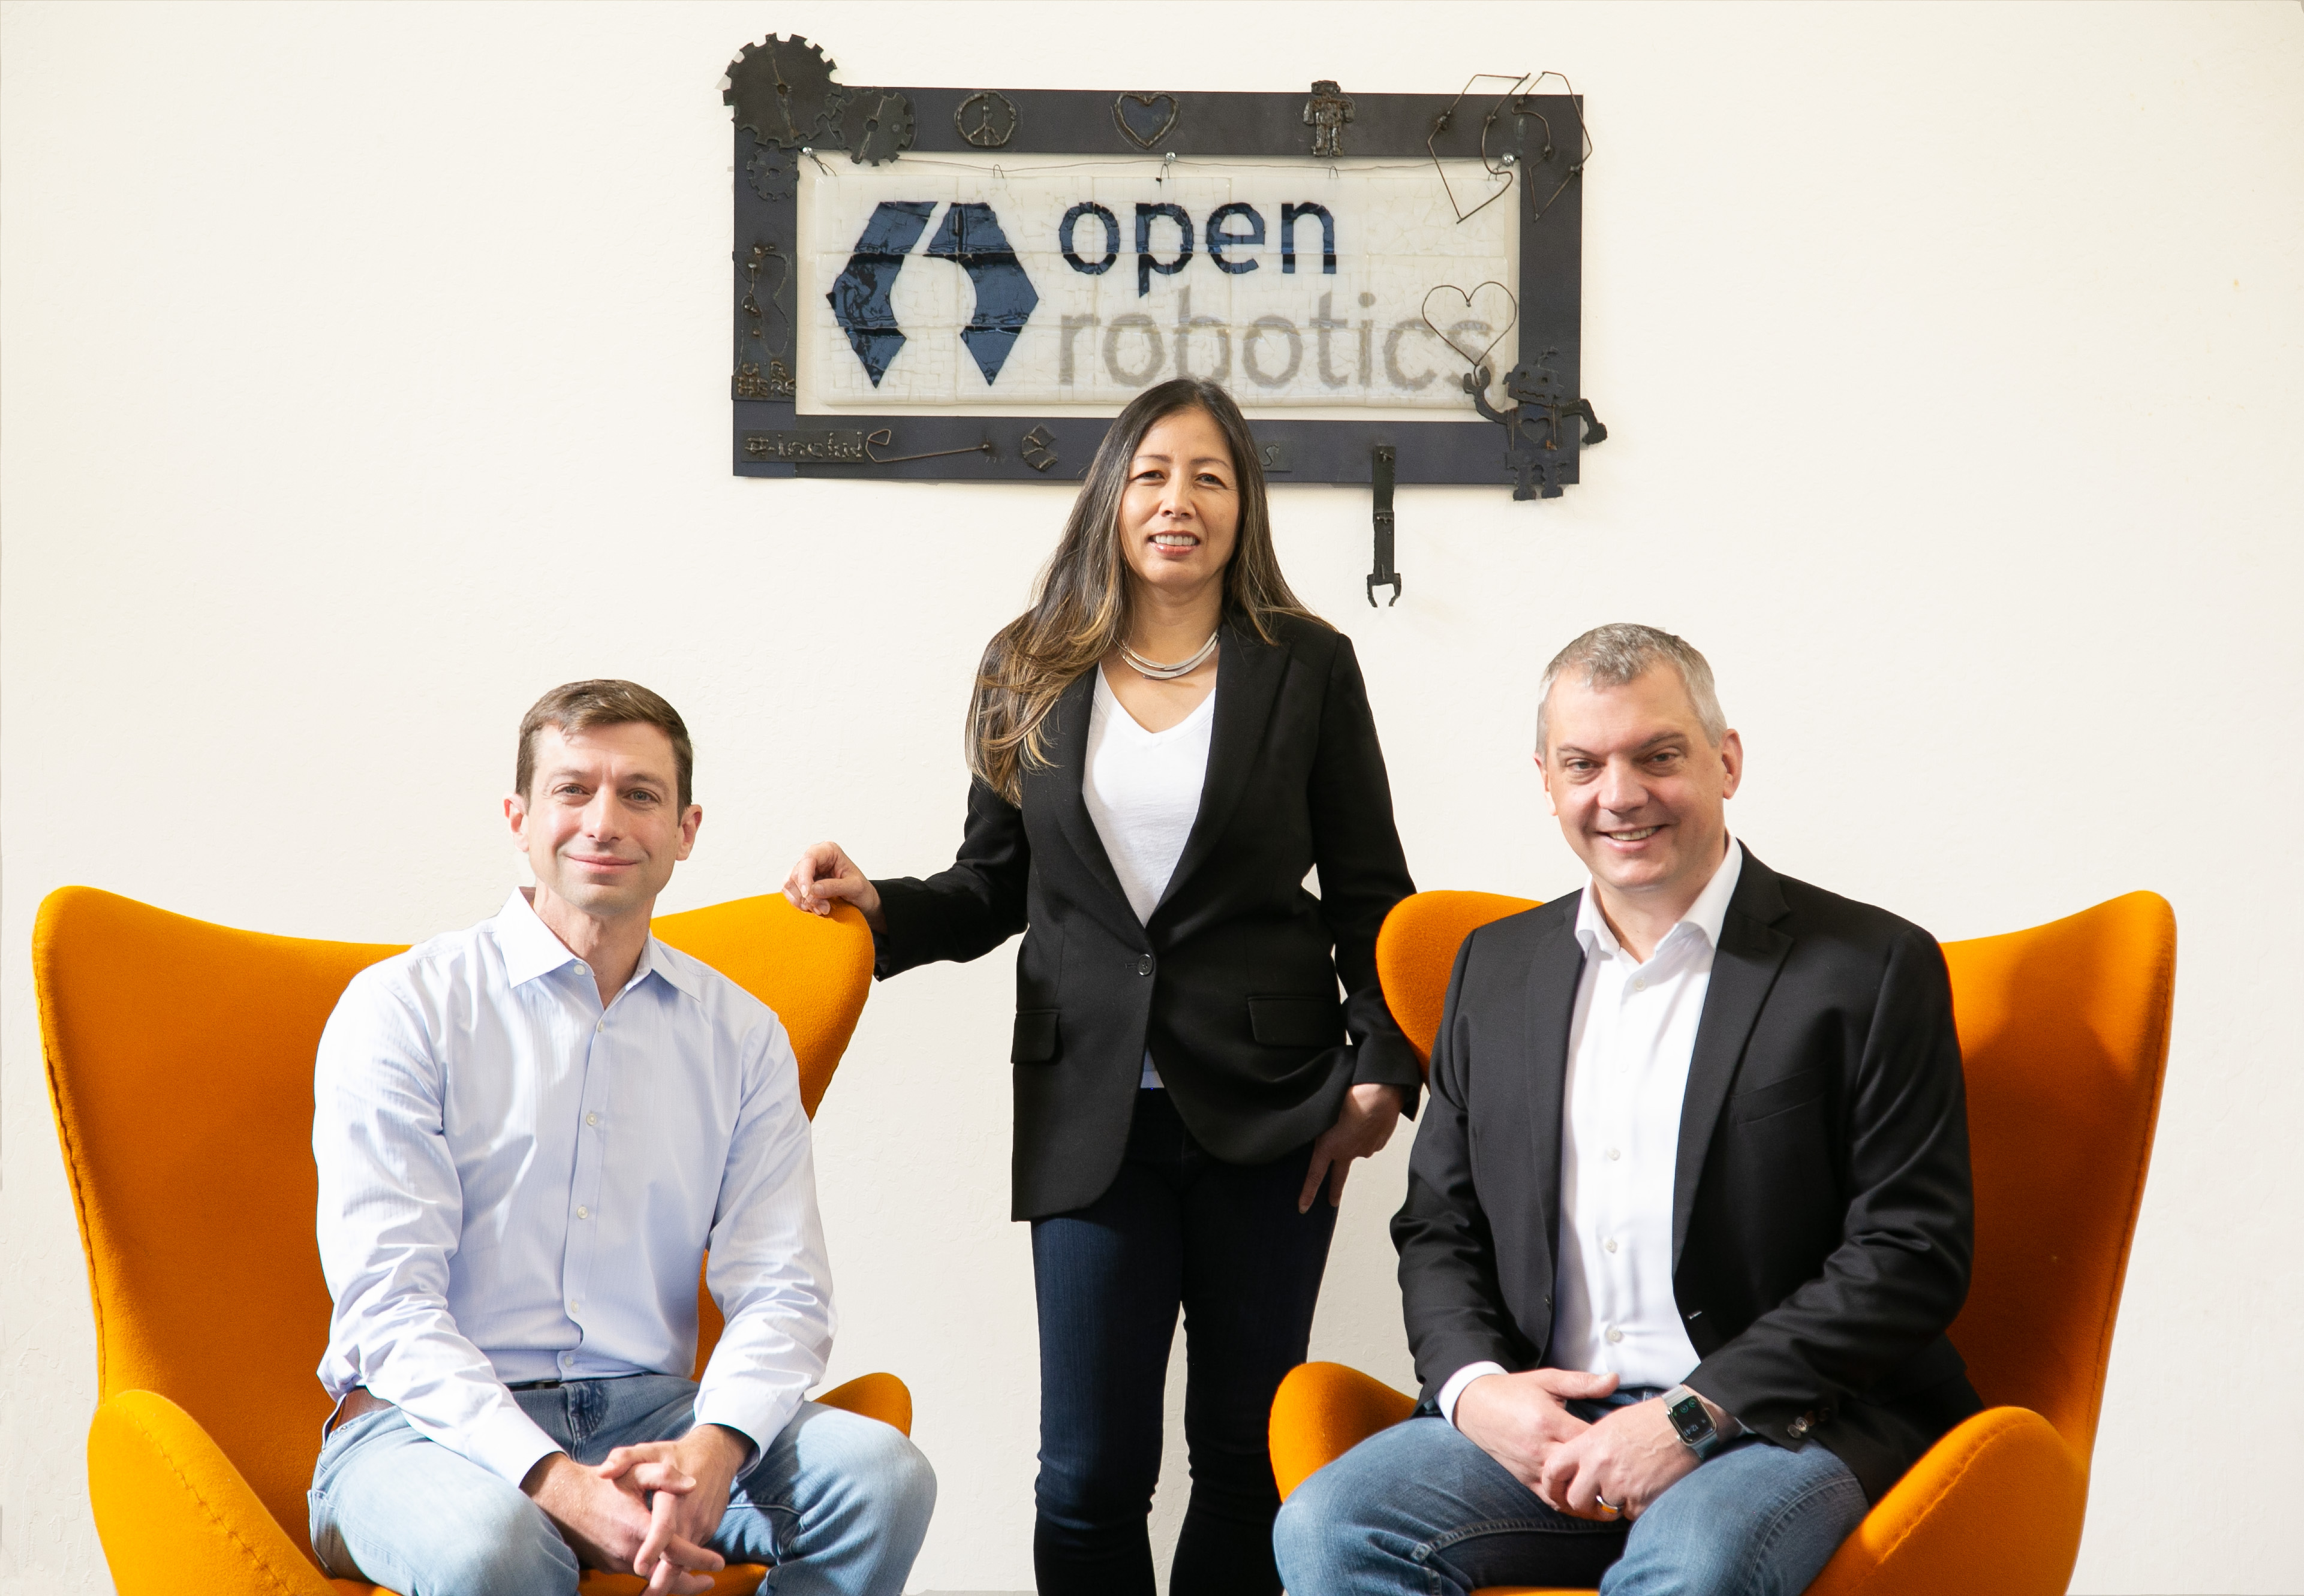 A woman stands behind two men sitting in orange chairs under a sign that says "Open Robotics"